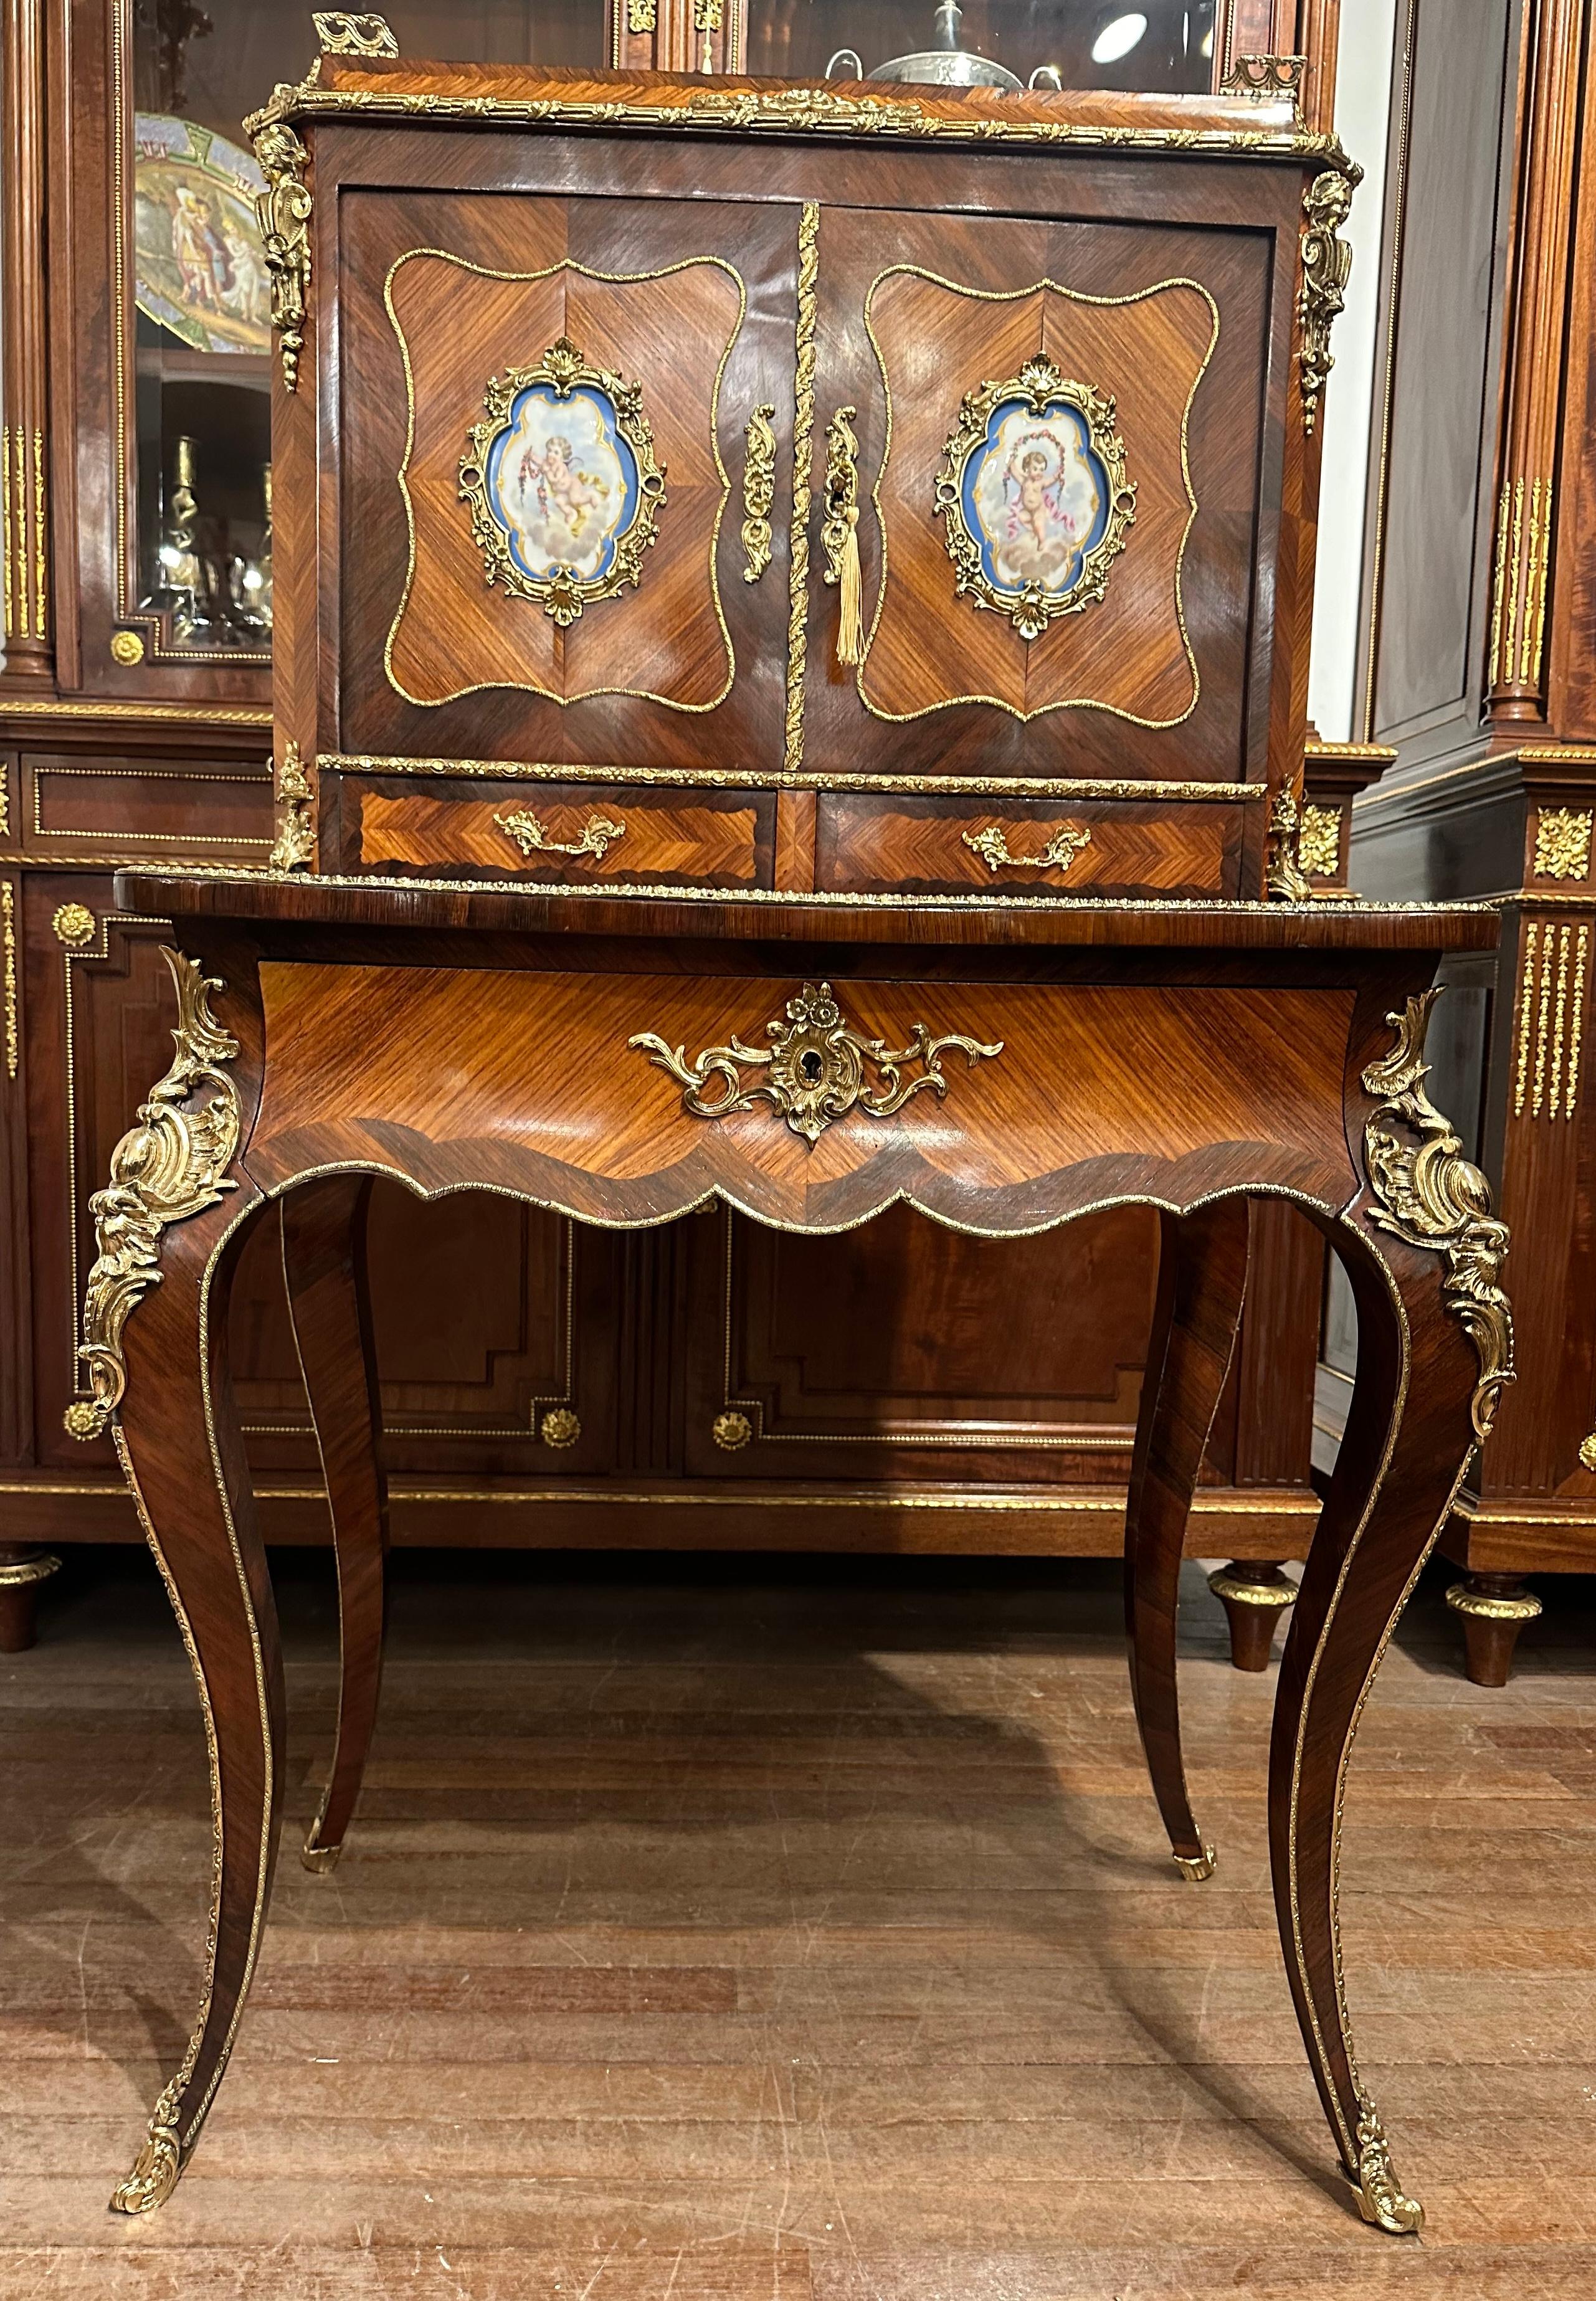 A elegant French bonheur de jour ladies writing desk in kingswood and rosewood, with bronze gilt ormolu mounts to the legs and hand painted Sevres plaques. There is a sliding red leather writing leaf, complete with key.
Bonheur de Jours were